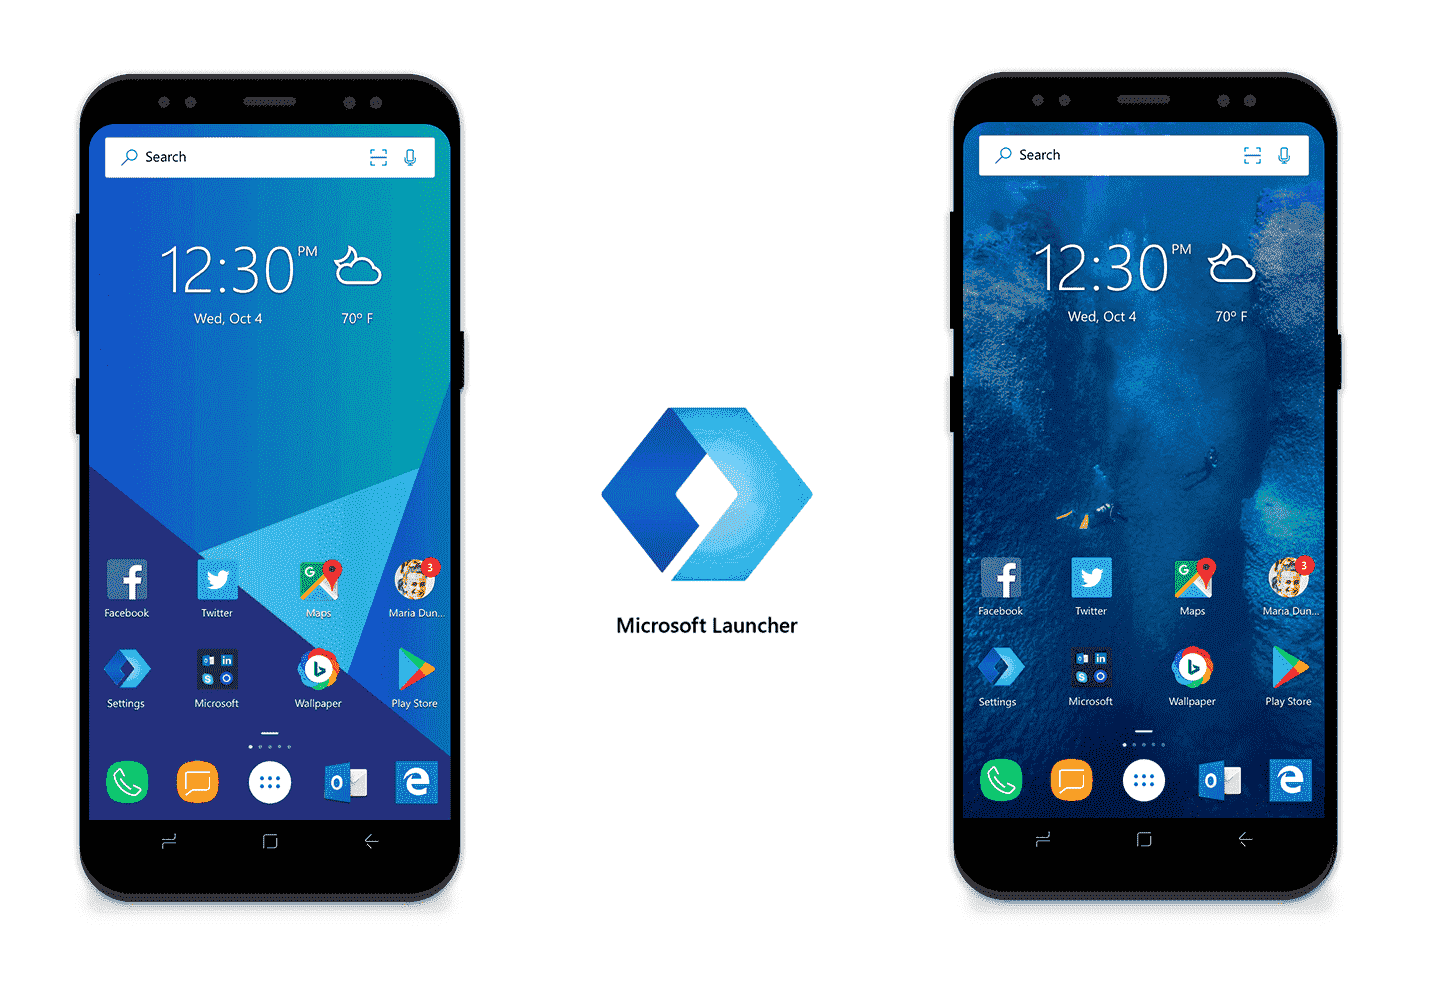 Microsoft Launcher app 4.12.0.44682 version for Android - August 1 f8d914f0746fe7594075d0b98171885f.png